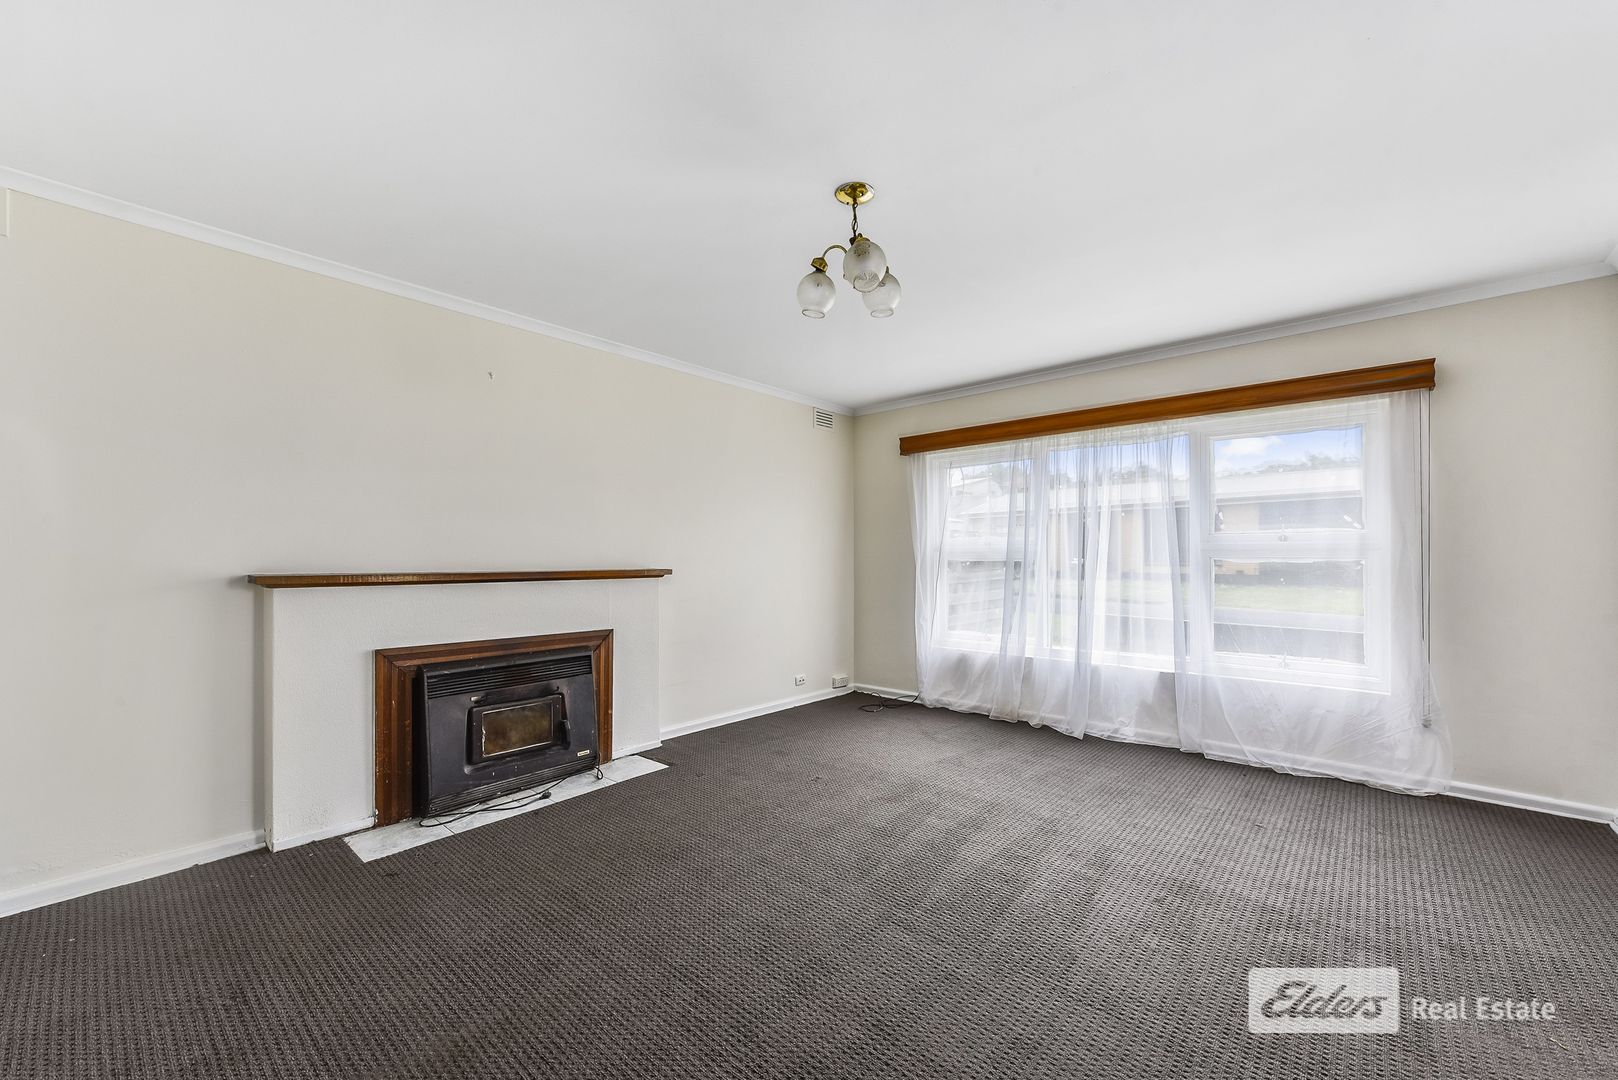 14 GRIFFITHS STREET, Mount Gambier SA 5290, Image 2